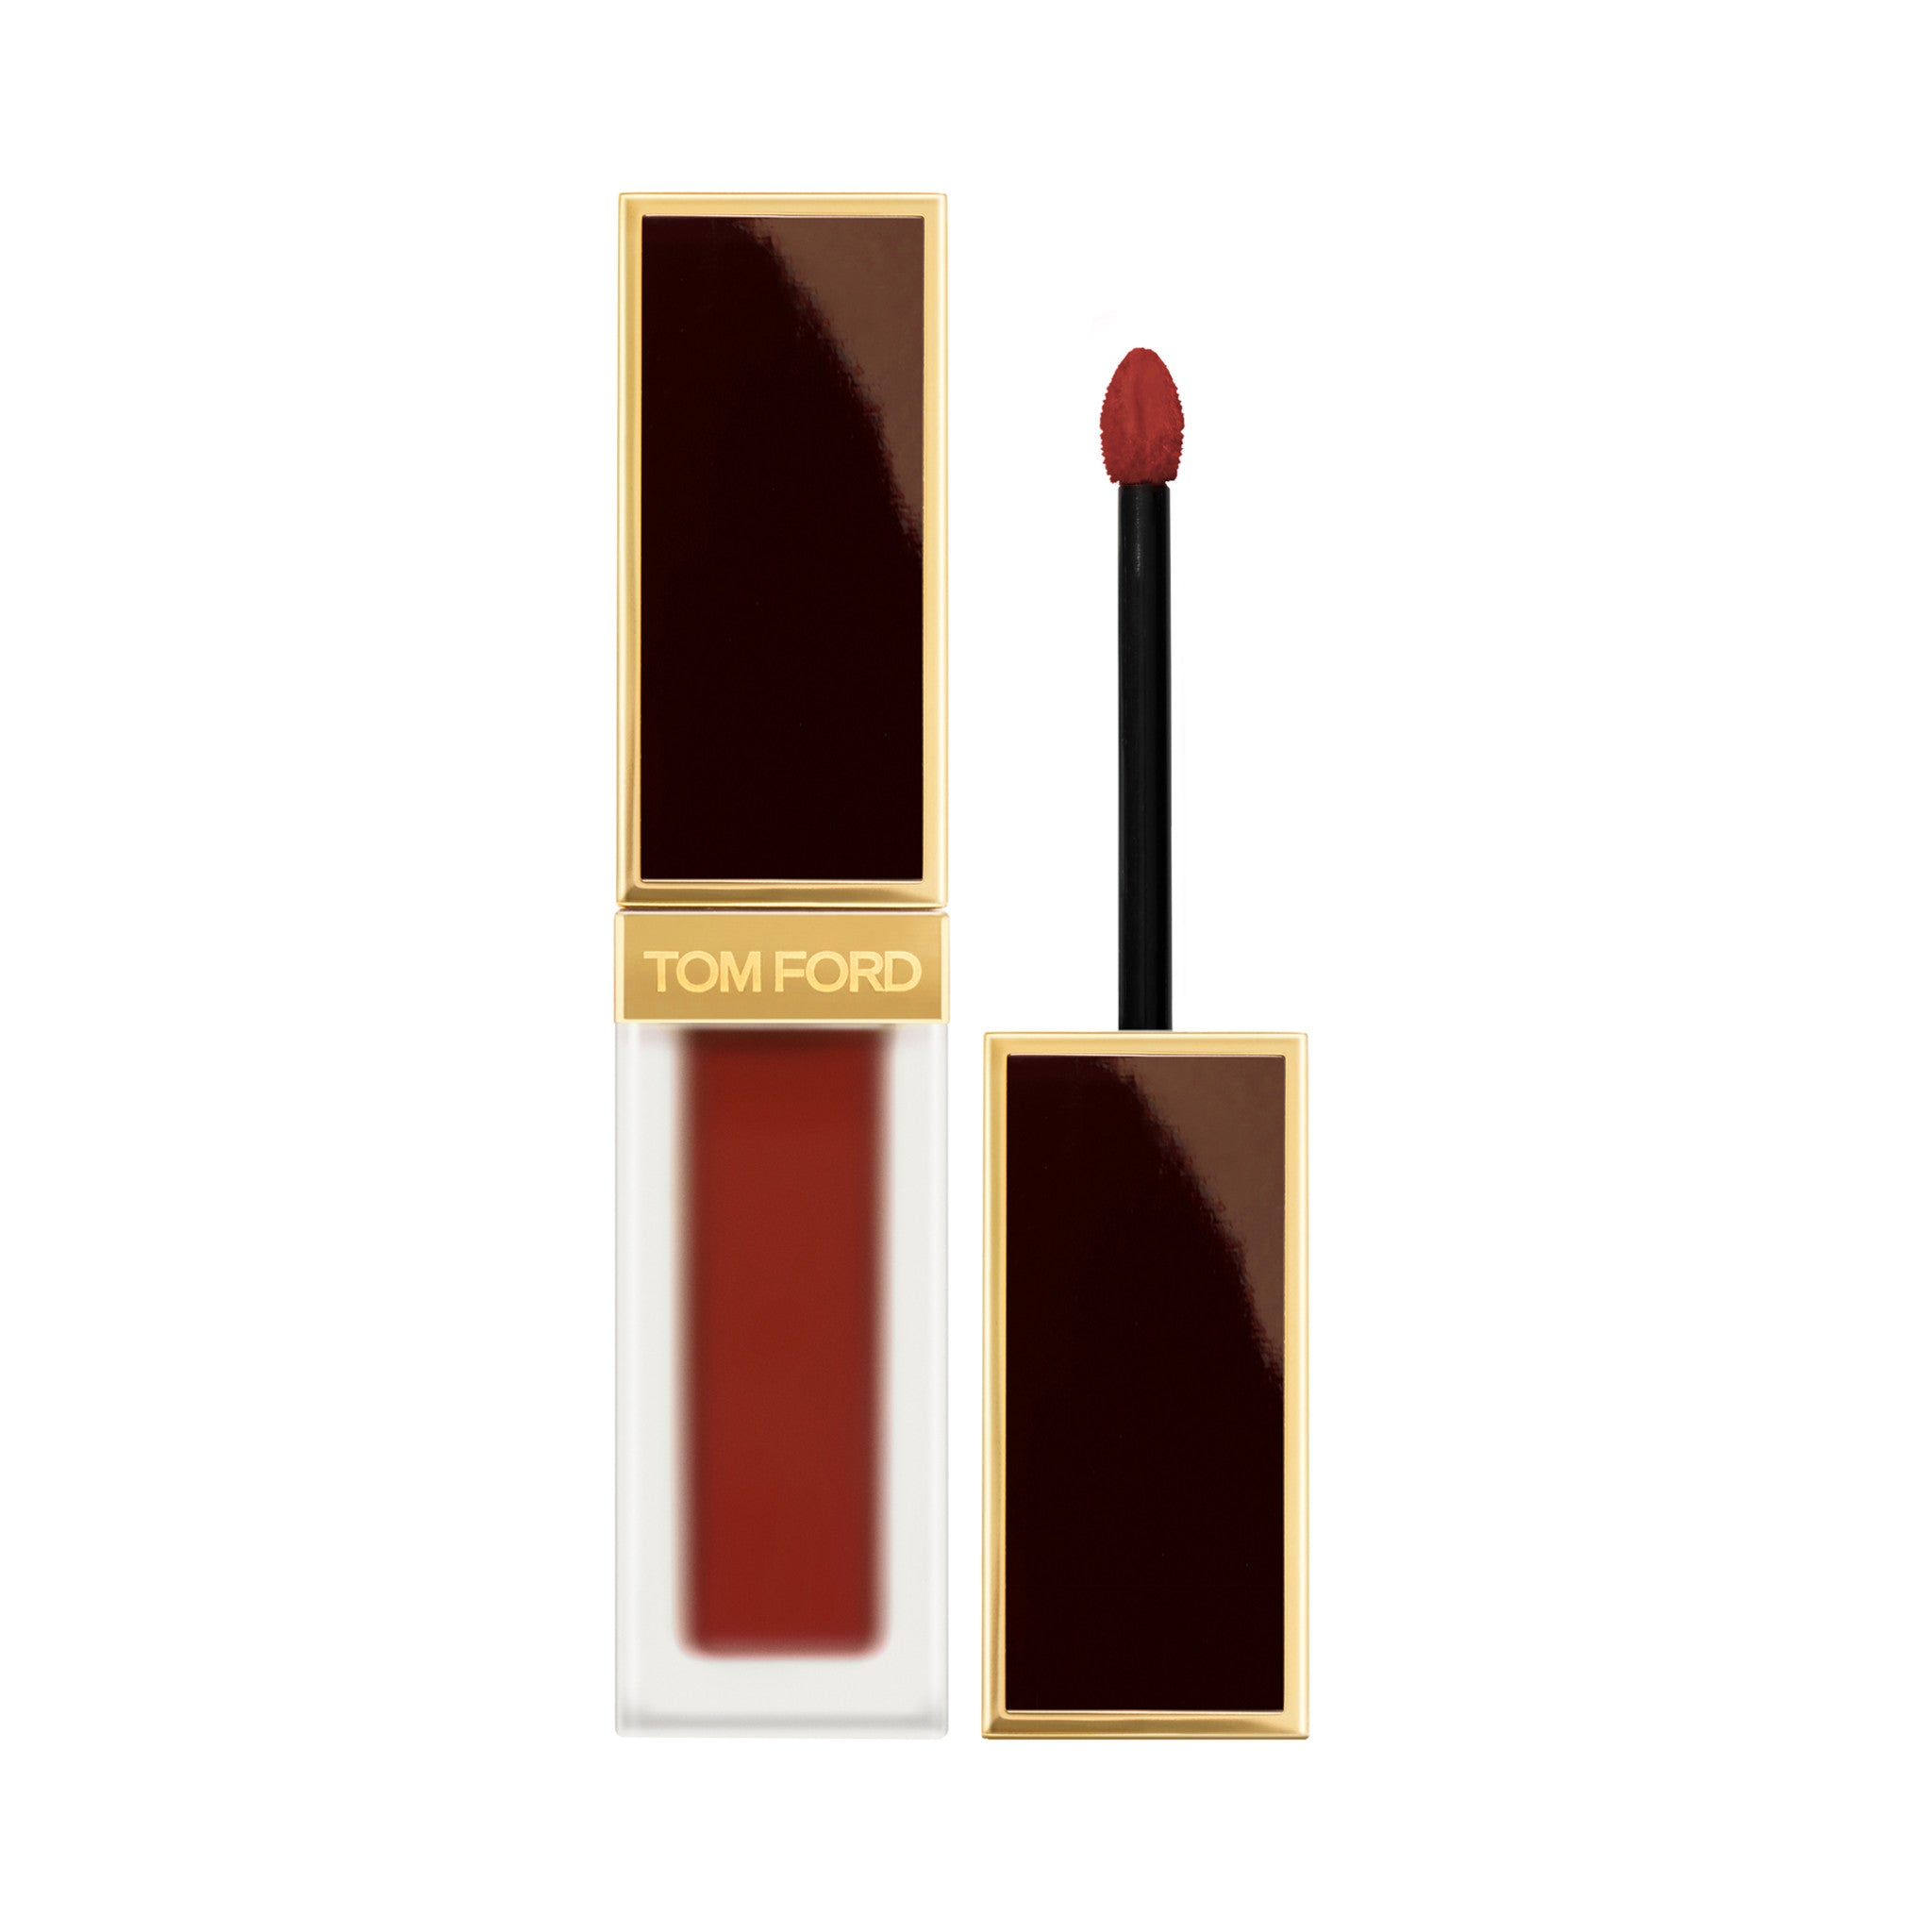 Tom Ford Liquid Lip Luxe Matte Color/Shade variant: Heatwave main image.